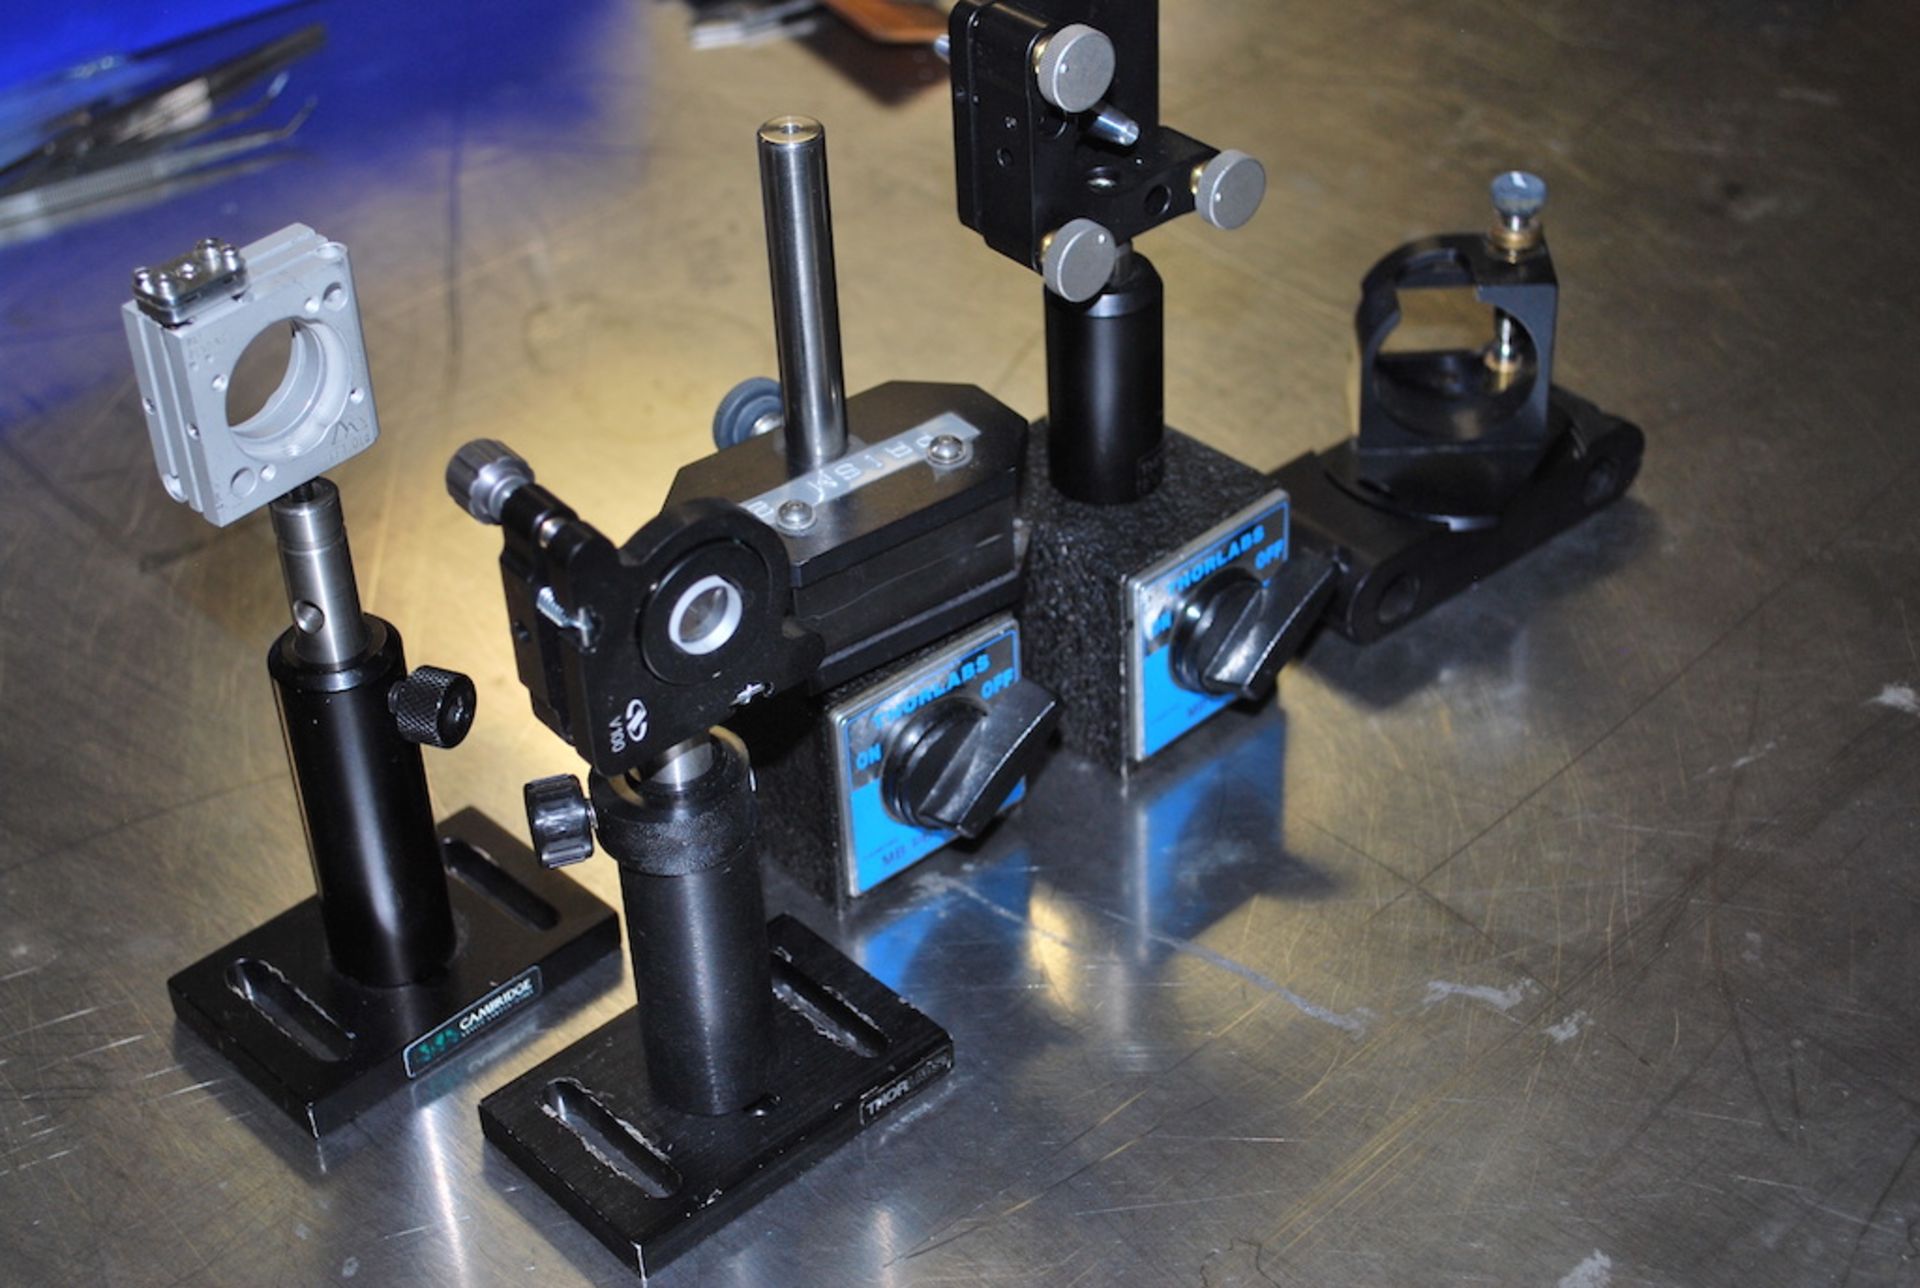 Qty-3 1" XY optical mounts on stands + Dispersion prism ( 25 % - 75% ratio ) - Image 3 of 14